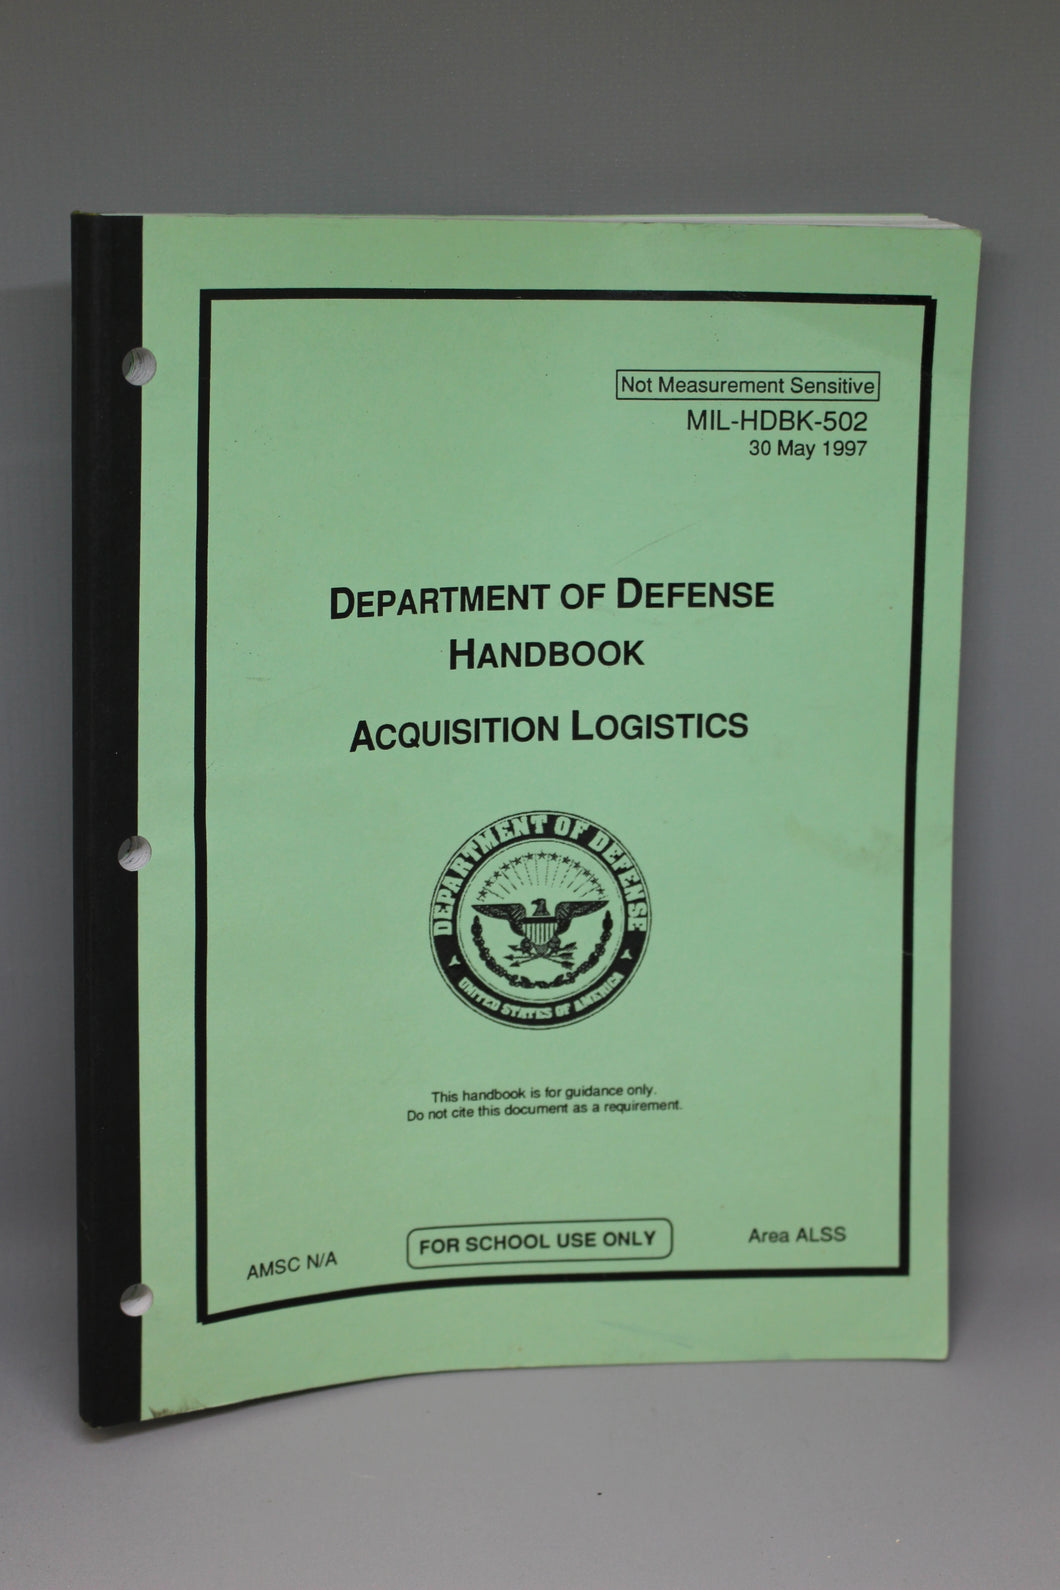 Department of Defense Acquisition Logistics, 30 May 1997